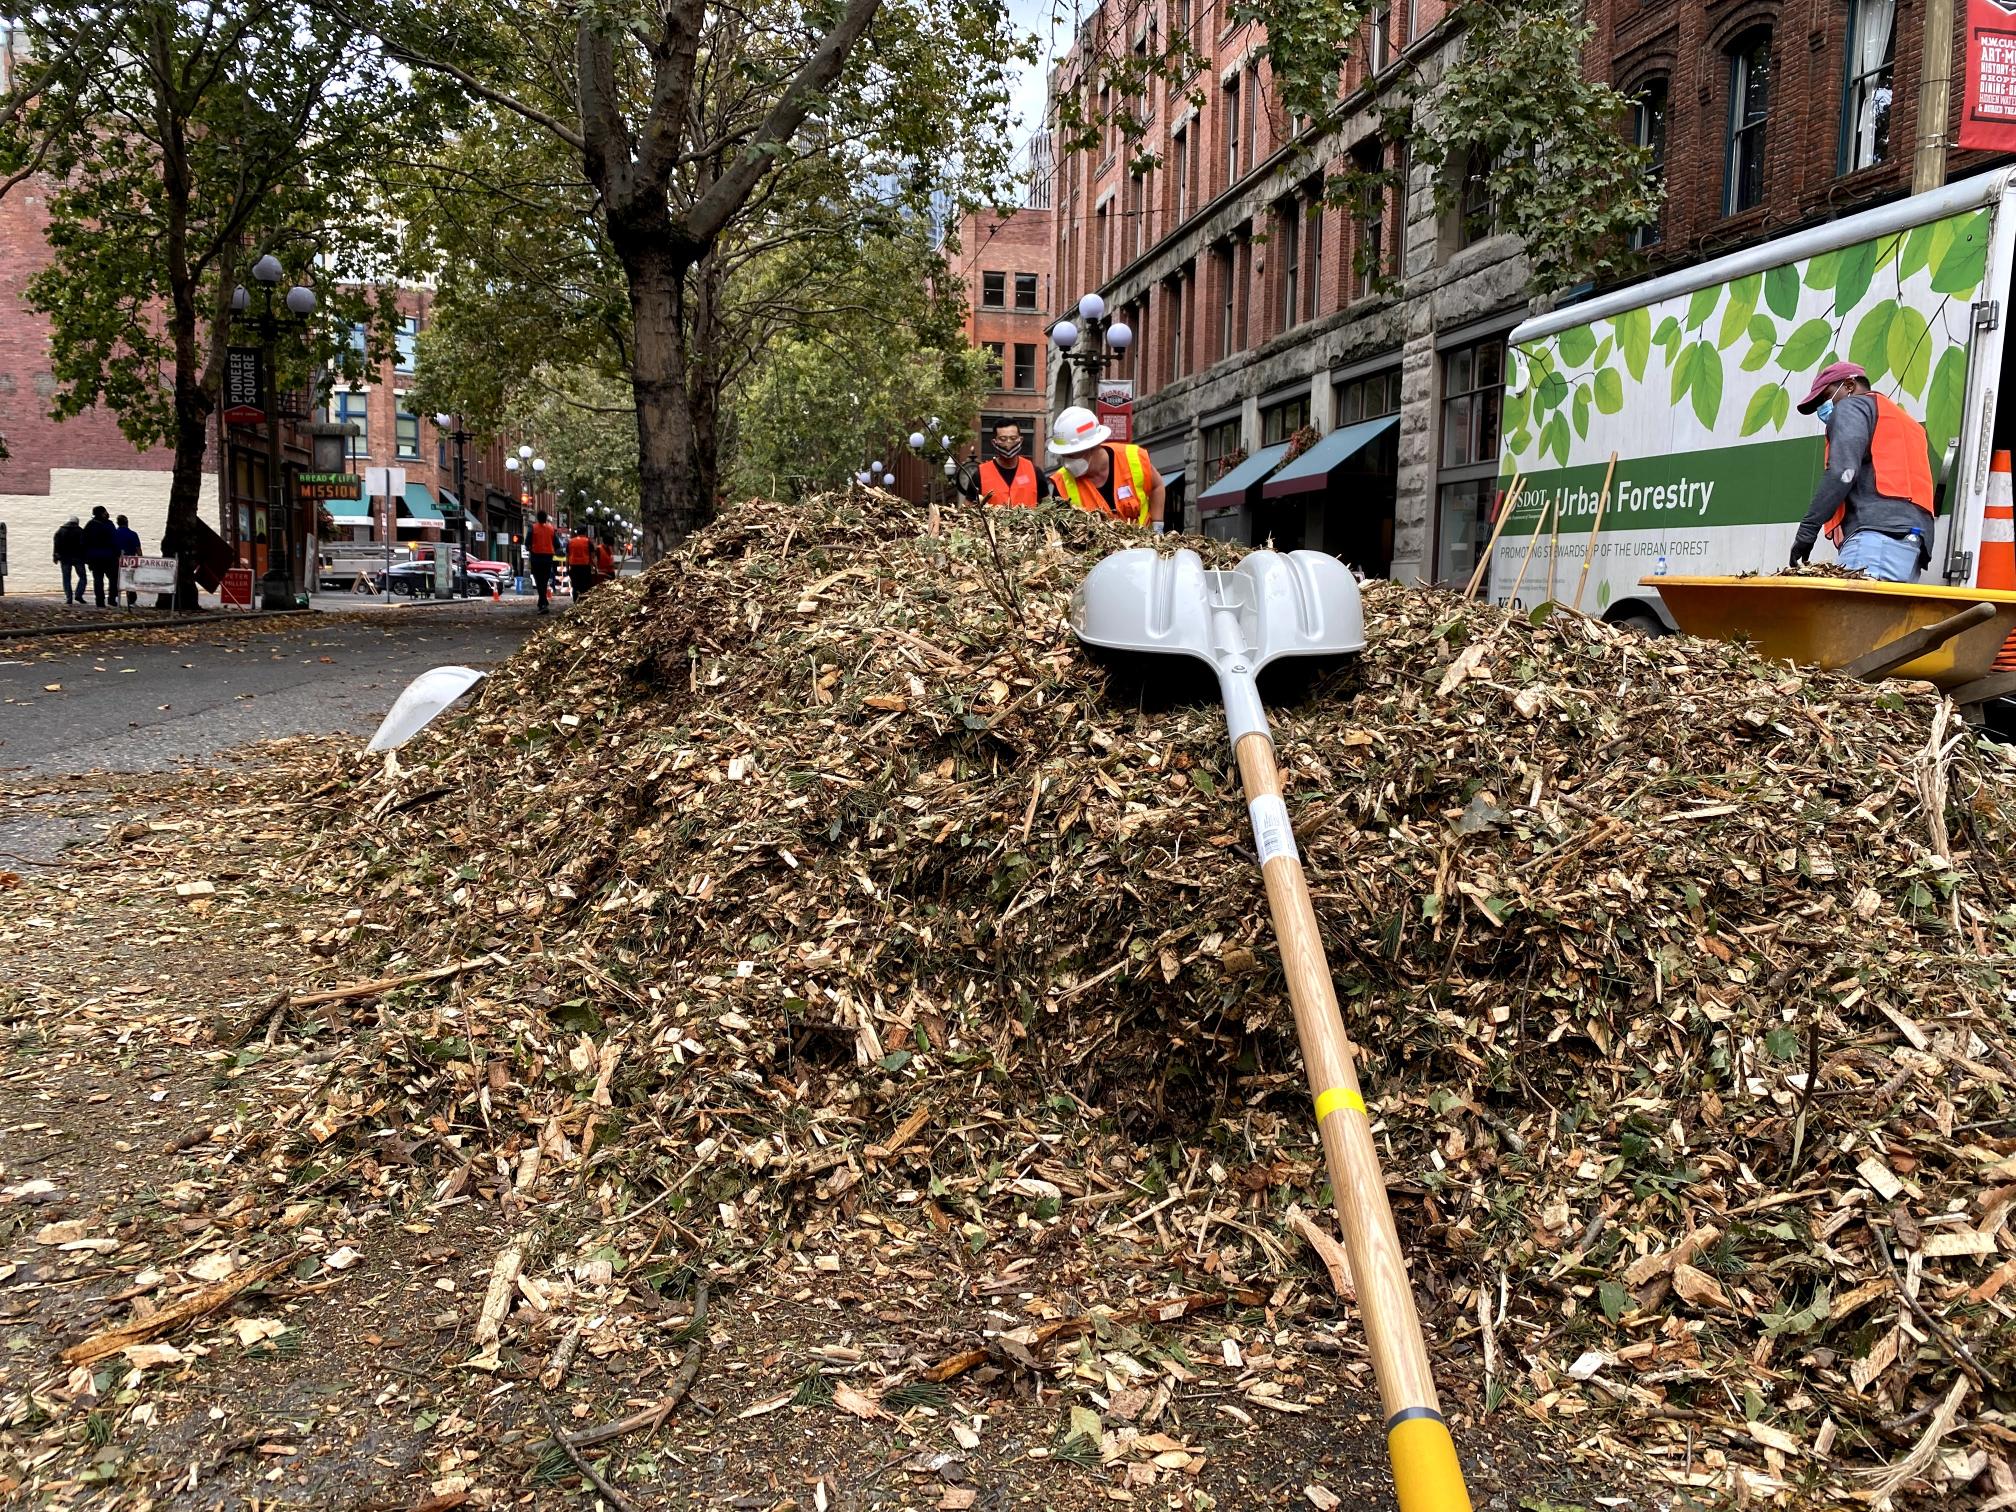 A large pile of mulch sits ready for installation in the roadway median along 1st Ave S in Seattle's Pioneer Square neighborhood. Trees, workers and brick buildings are visible in the background.